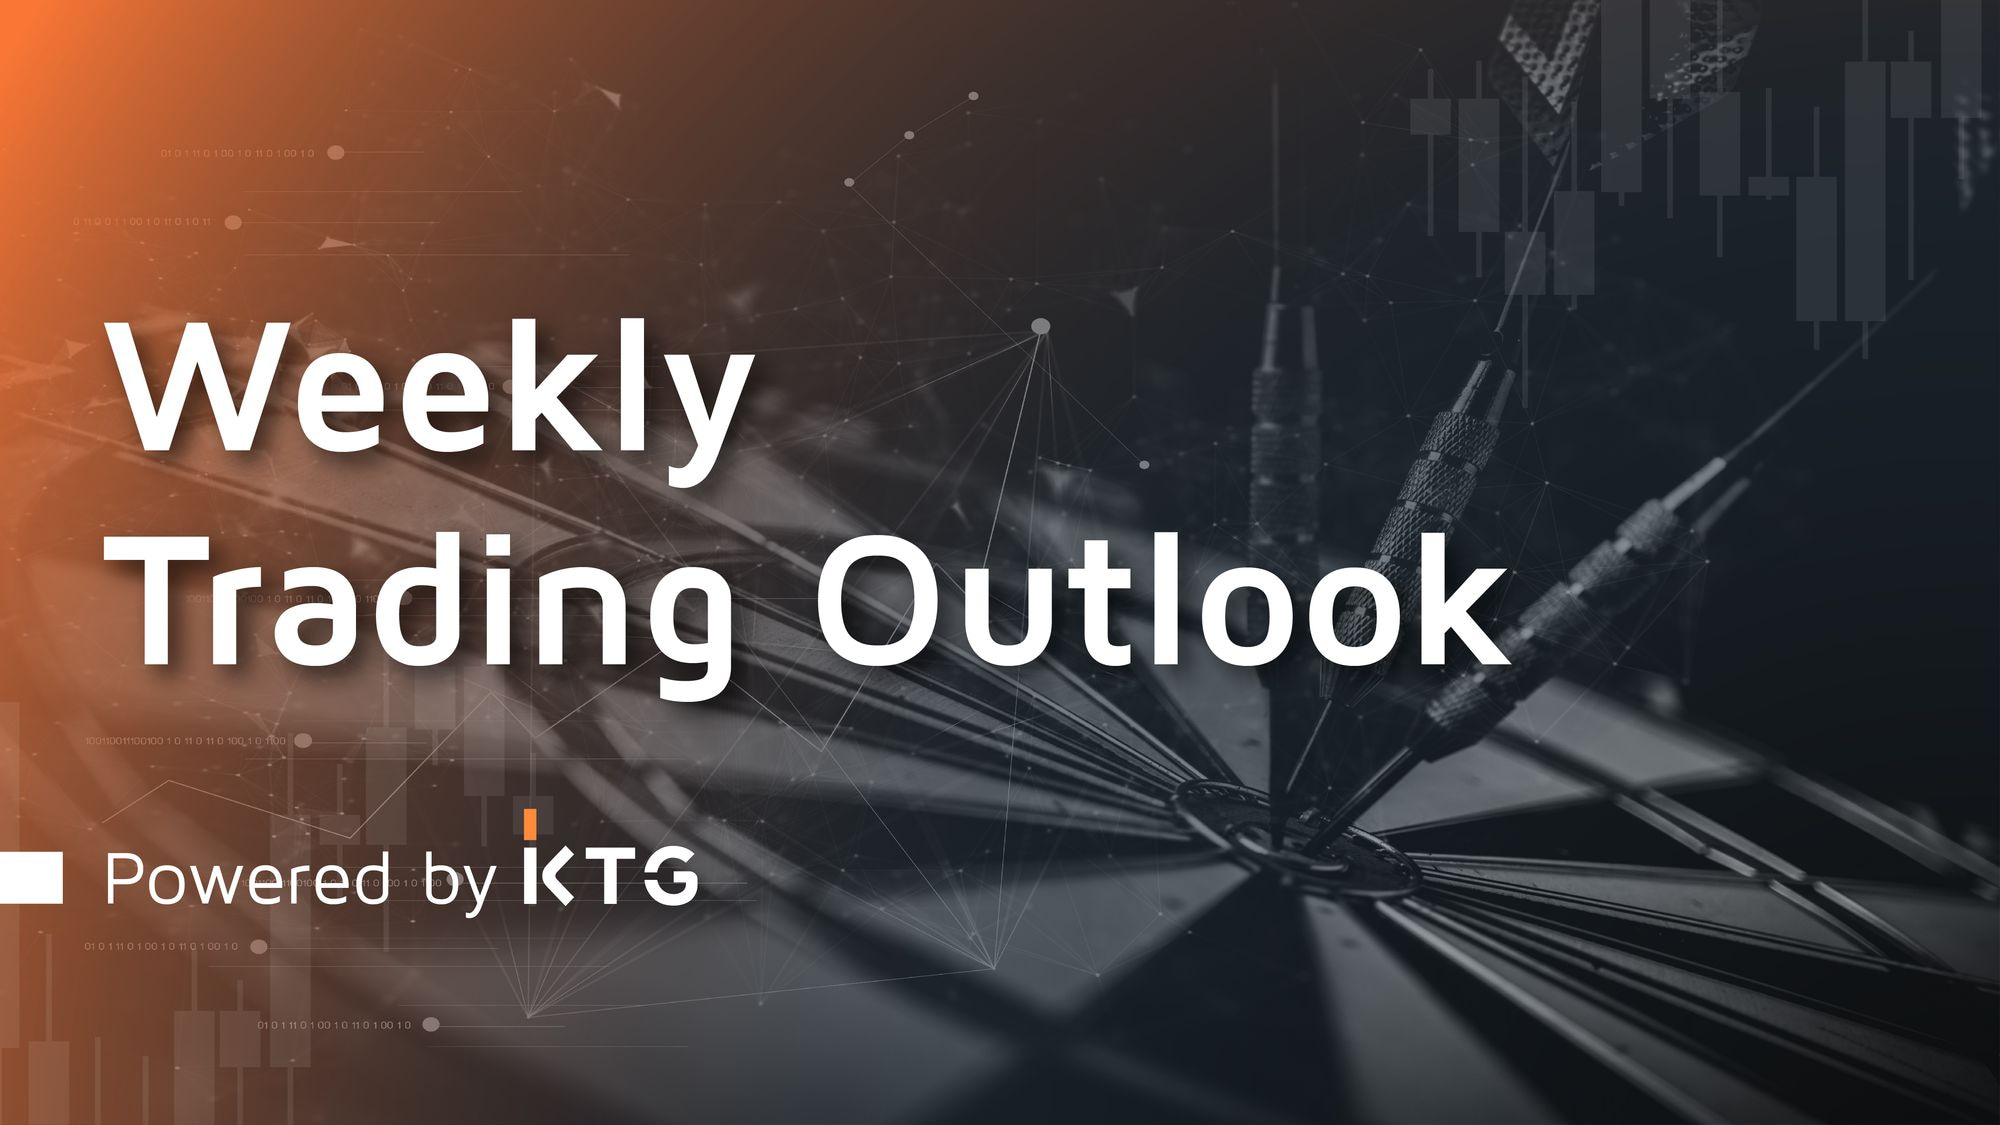 BTC remains in indecision mode - #TradingOutlook Powered by KTG